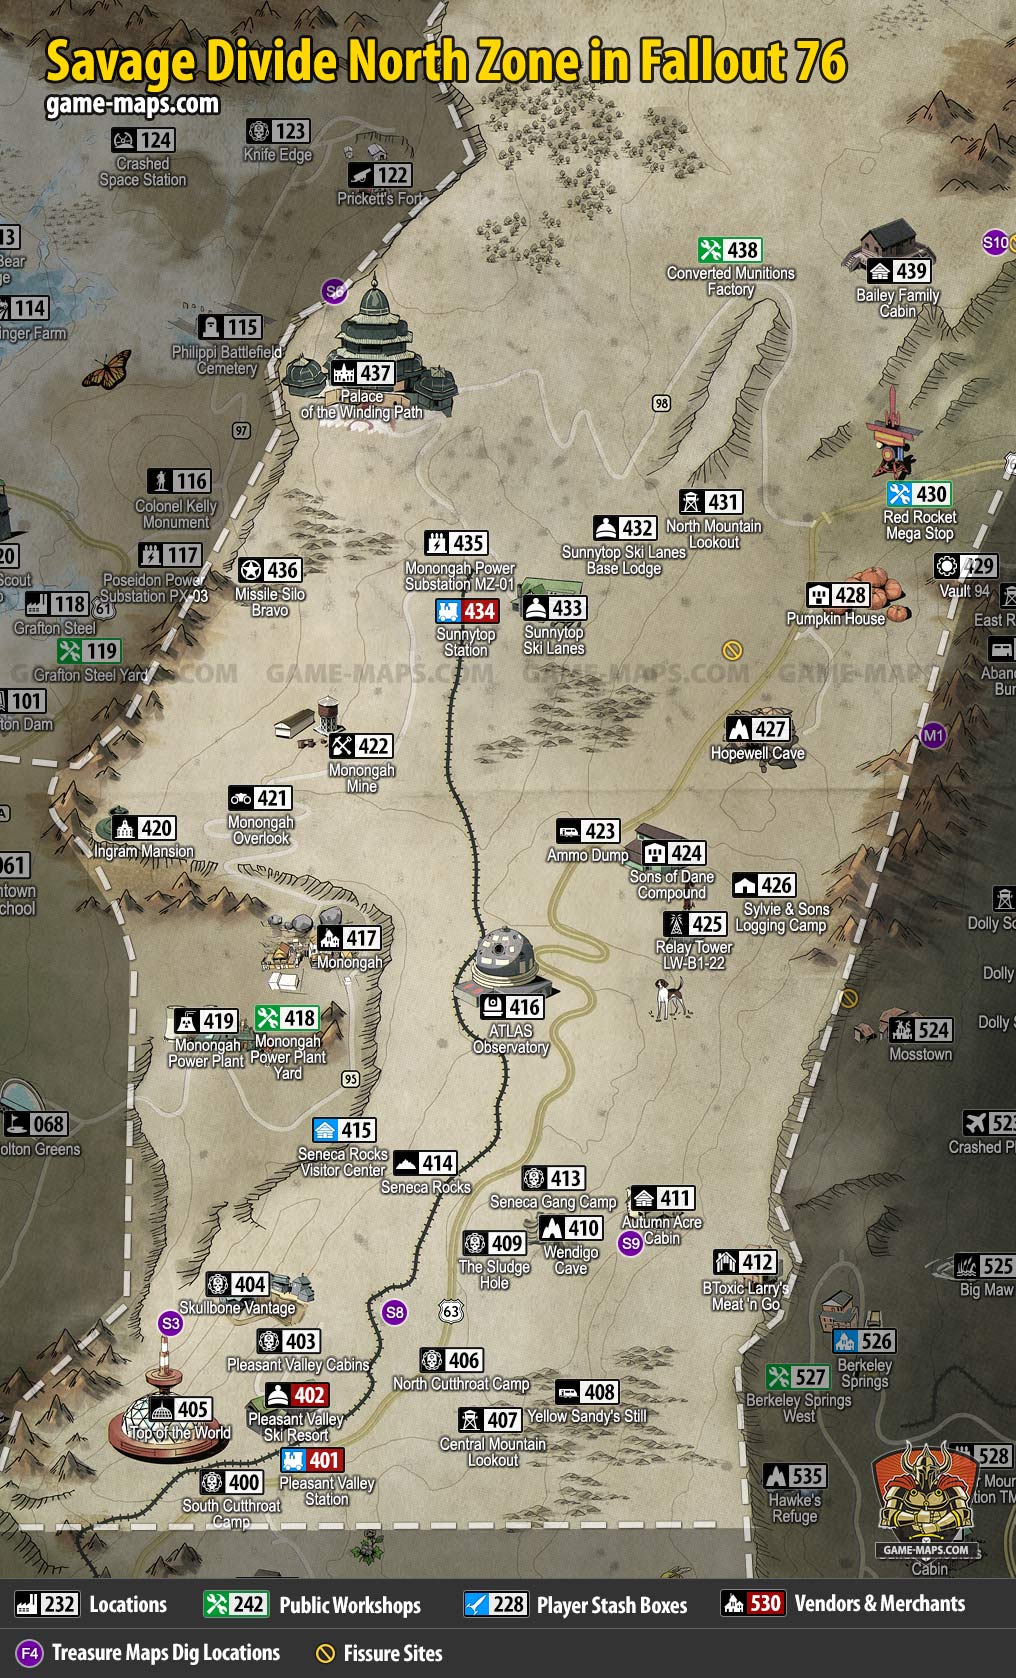 Map of Savage Divide North Region for Fallout 76 Video Game.